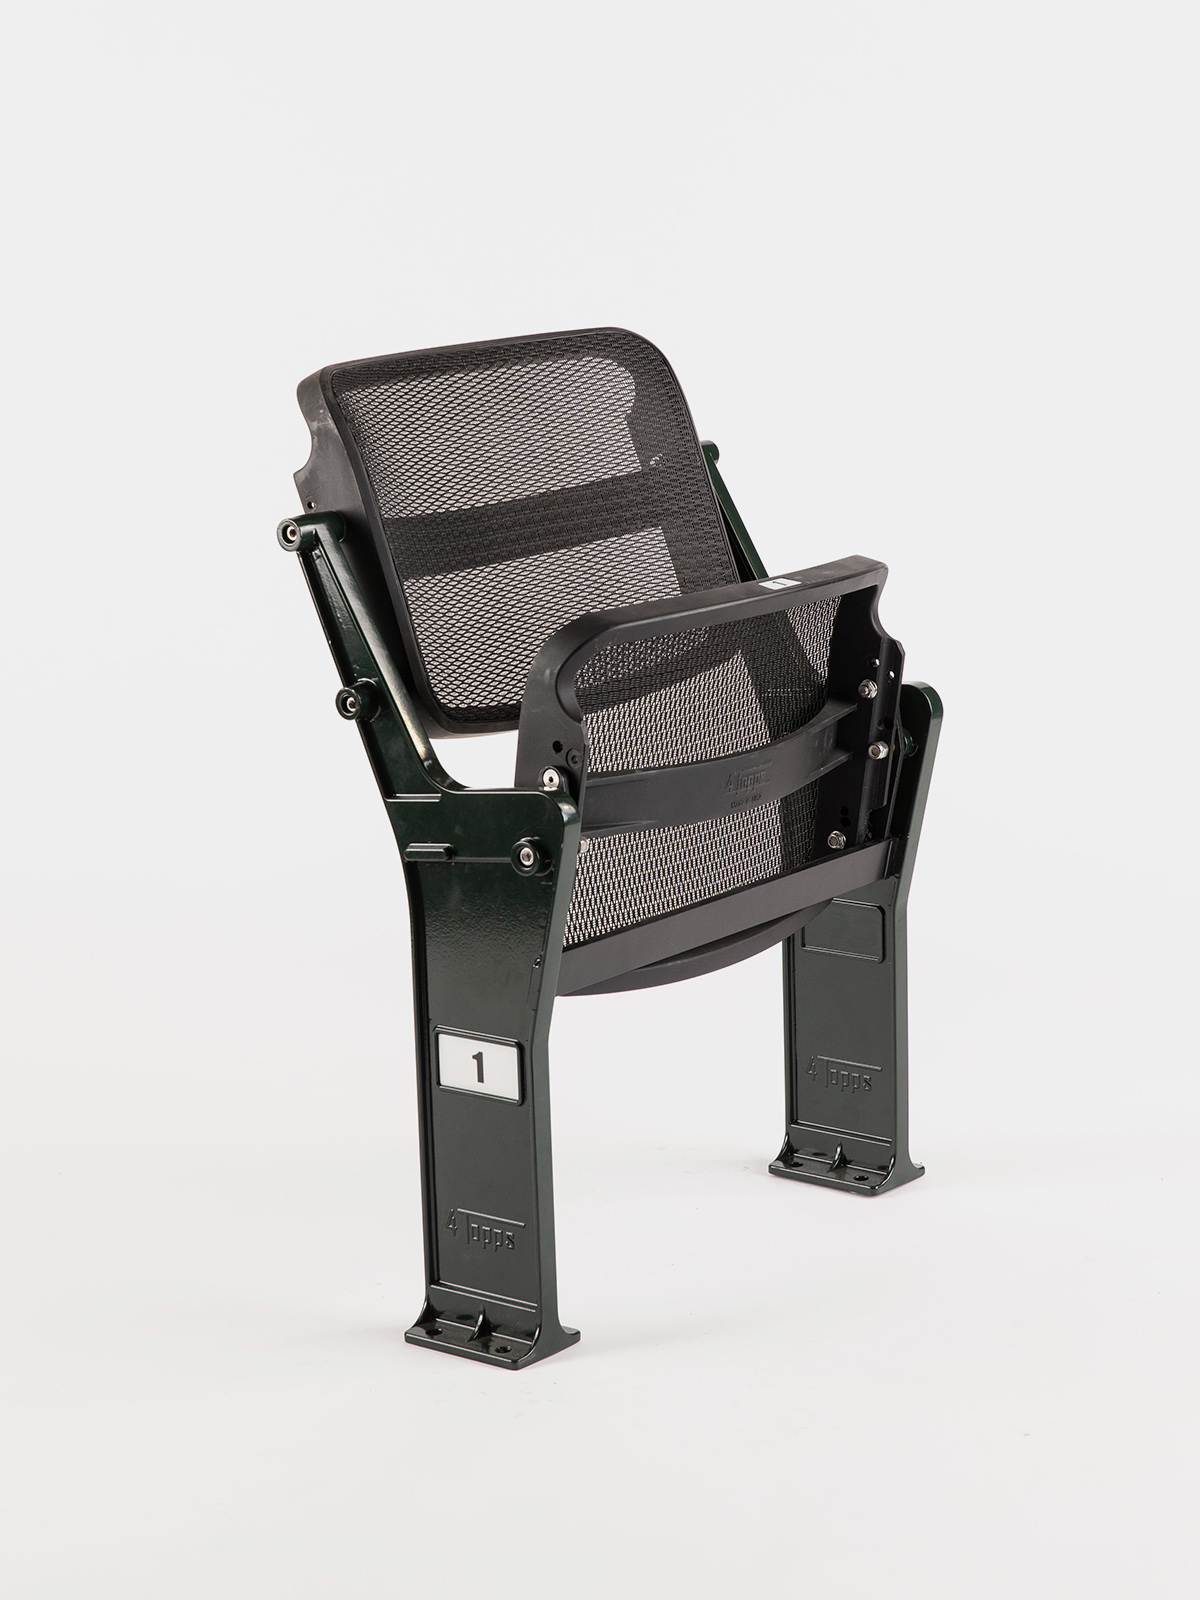 Angled front view of 4Topps slim line seat on white background